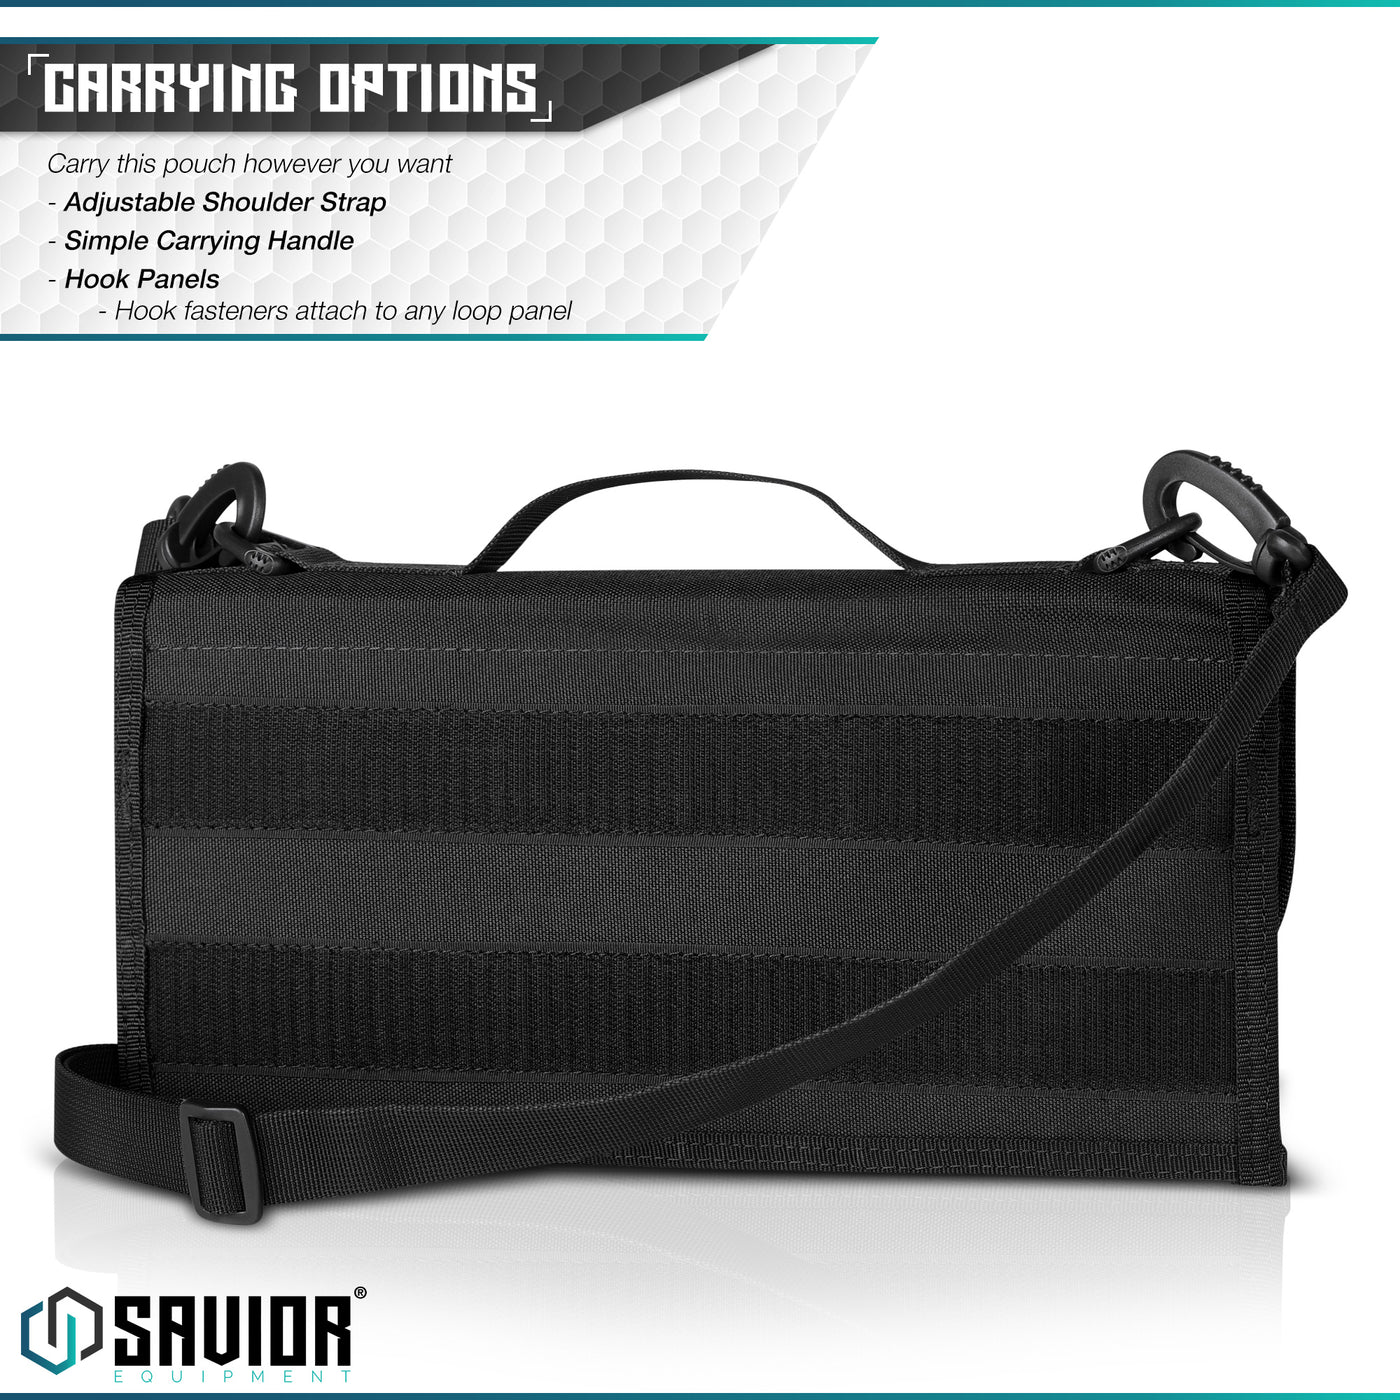 Multiple Carrying Options - You can carry this mag pouch with the adjustable shoulder strap on any D-Rings on the pouch or hook fasteners to attach to any loop panel.